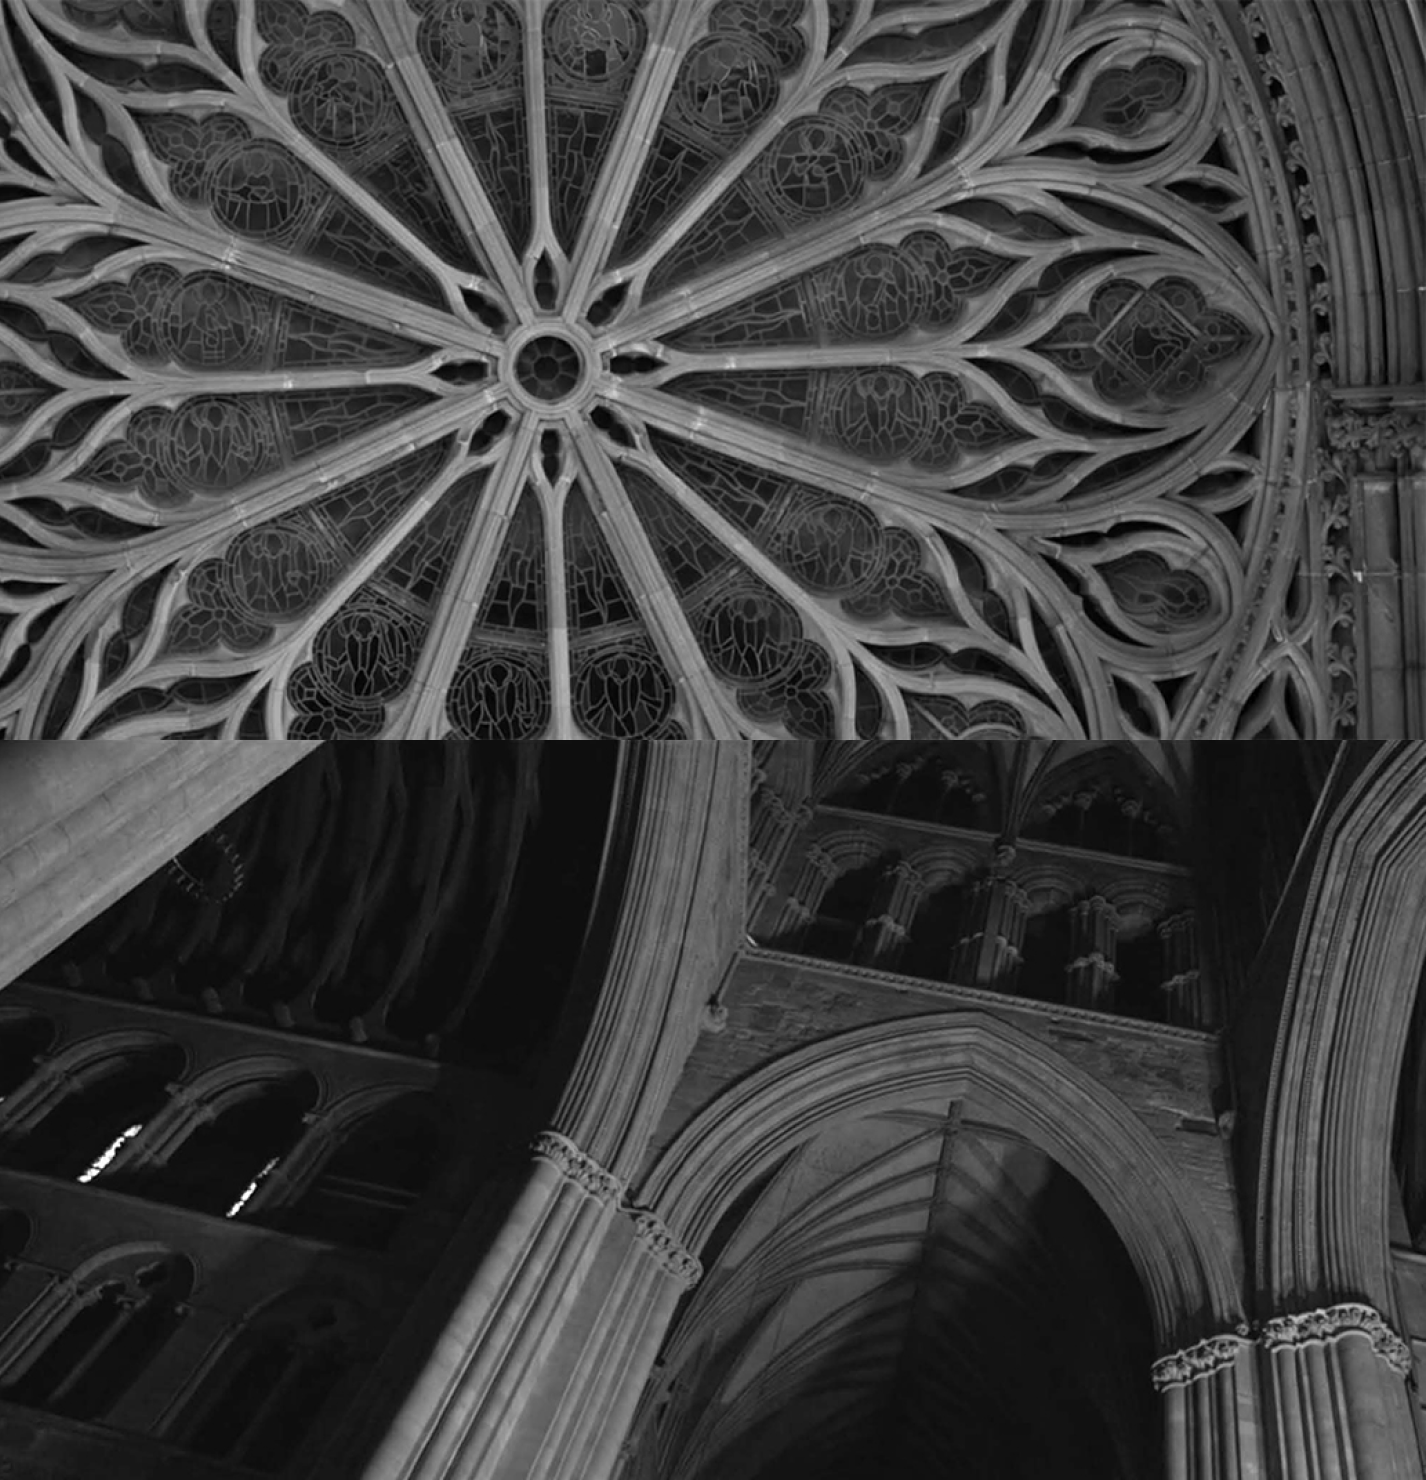 Rosette and arches of Nidaros cathedral